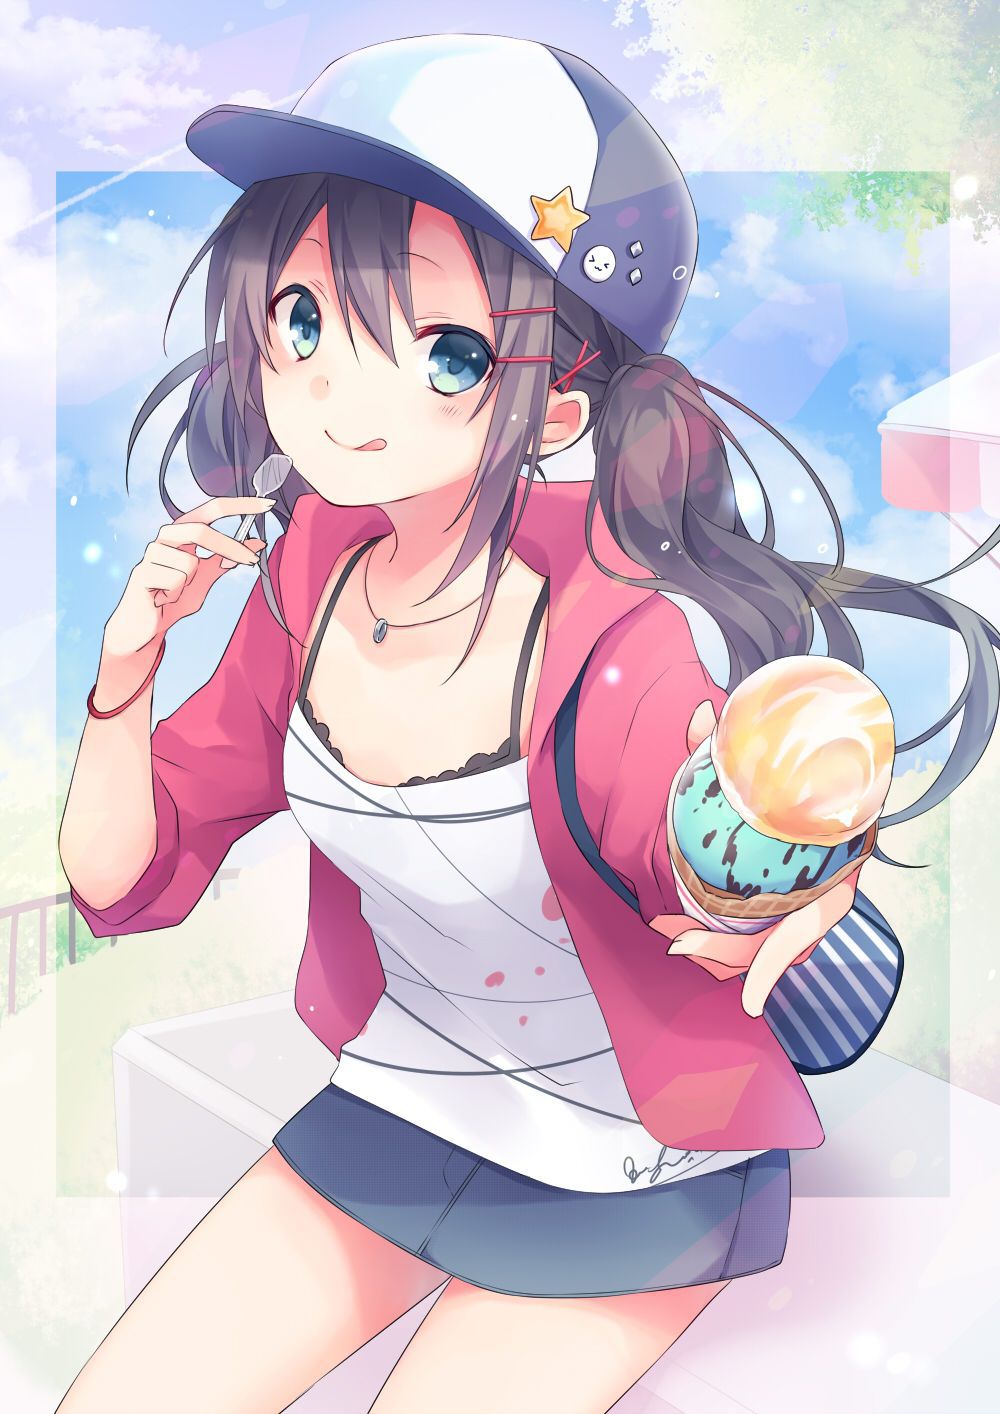 [Lori Denim] I tried to collect stylish and cute moe image of Lori girl wearing jeans and denim products! 19